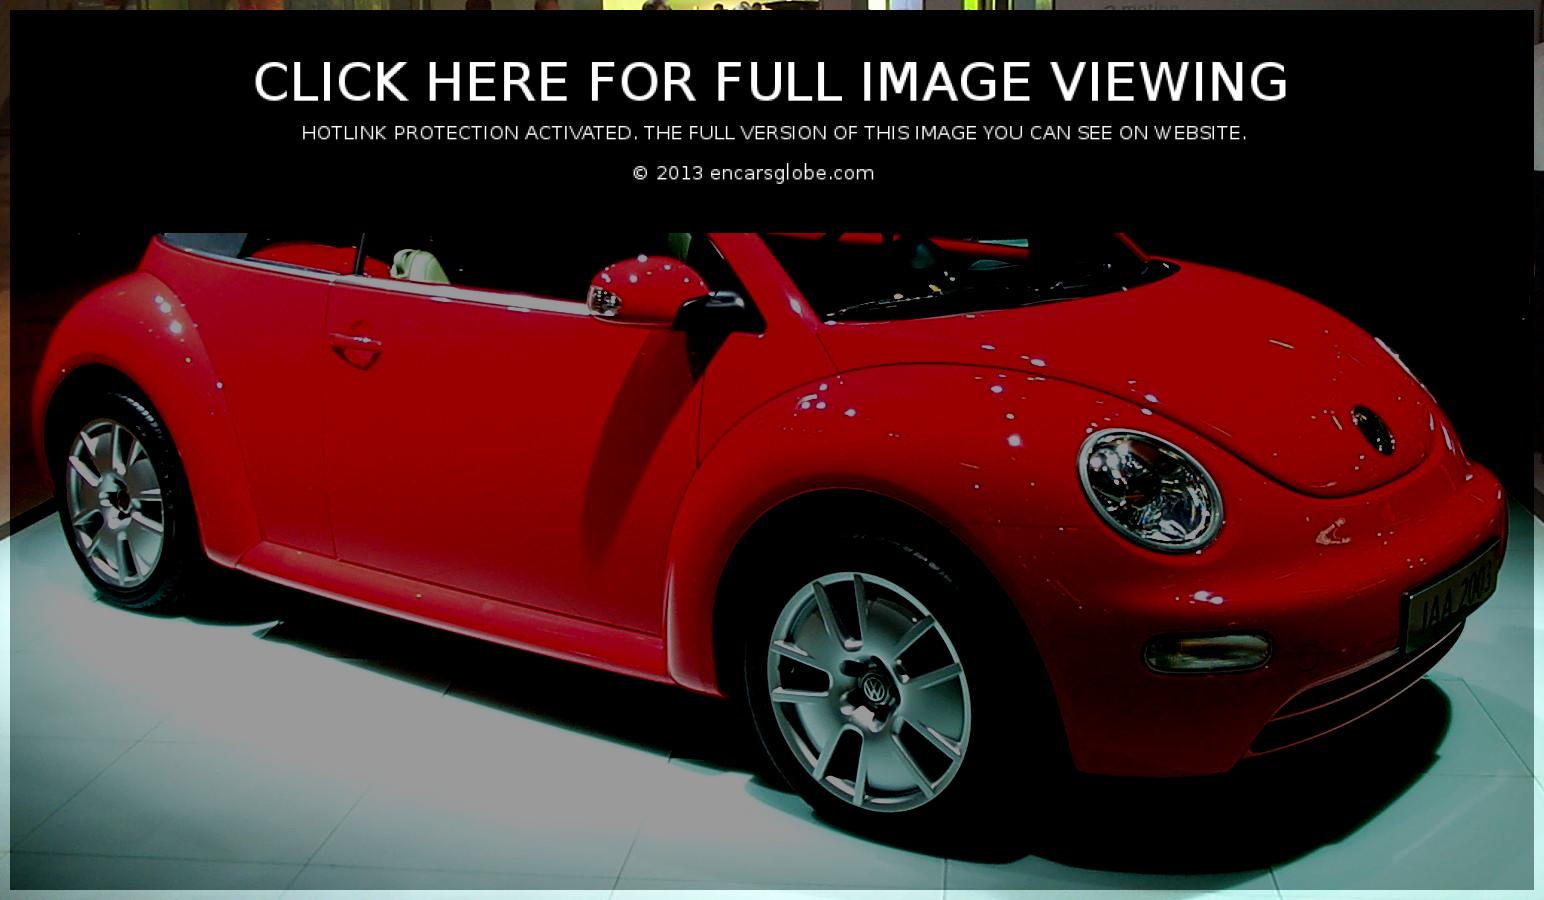 Volkswagen New Beetle 20T Photo Gallery: Photo #02 out of 10 ...